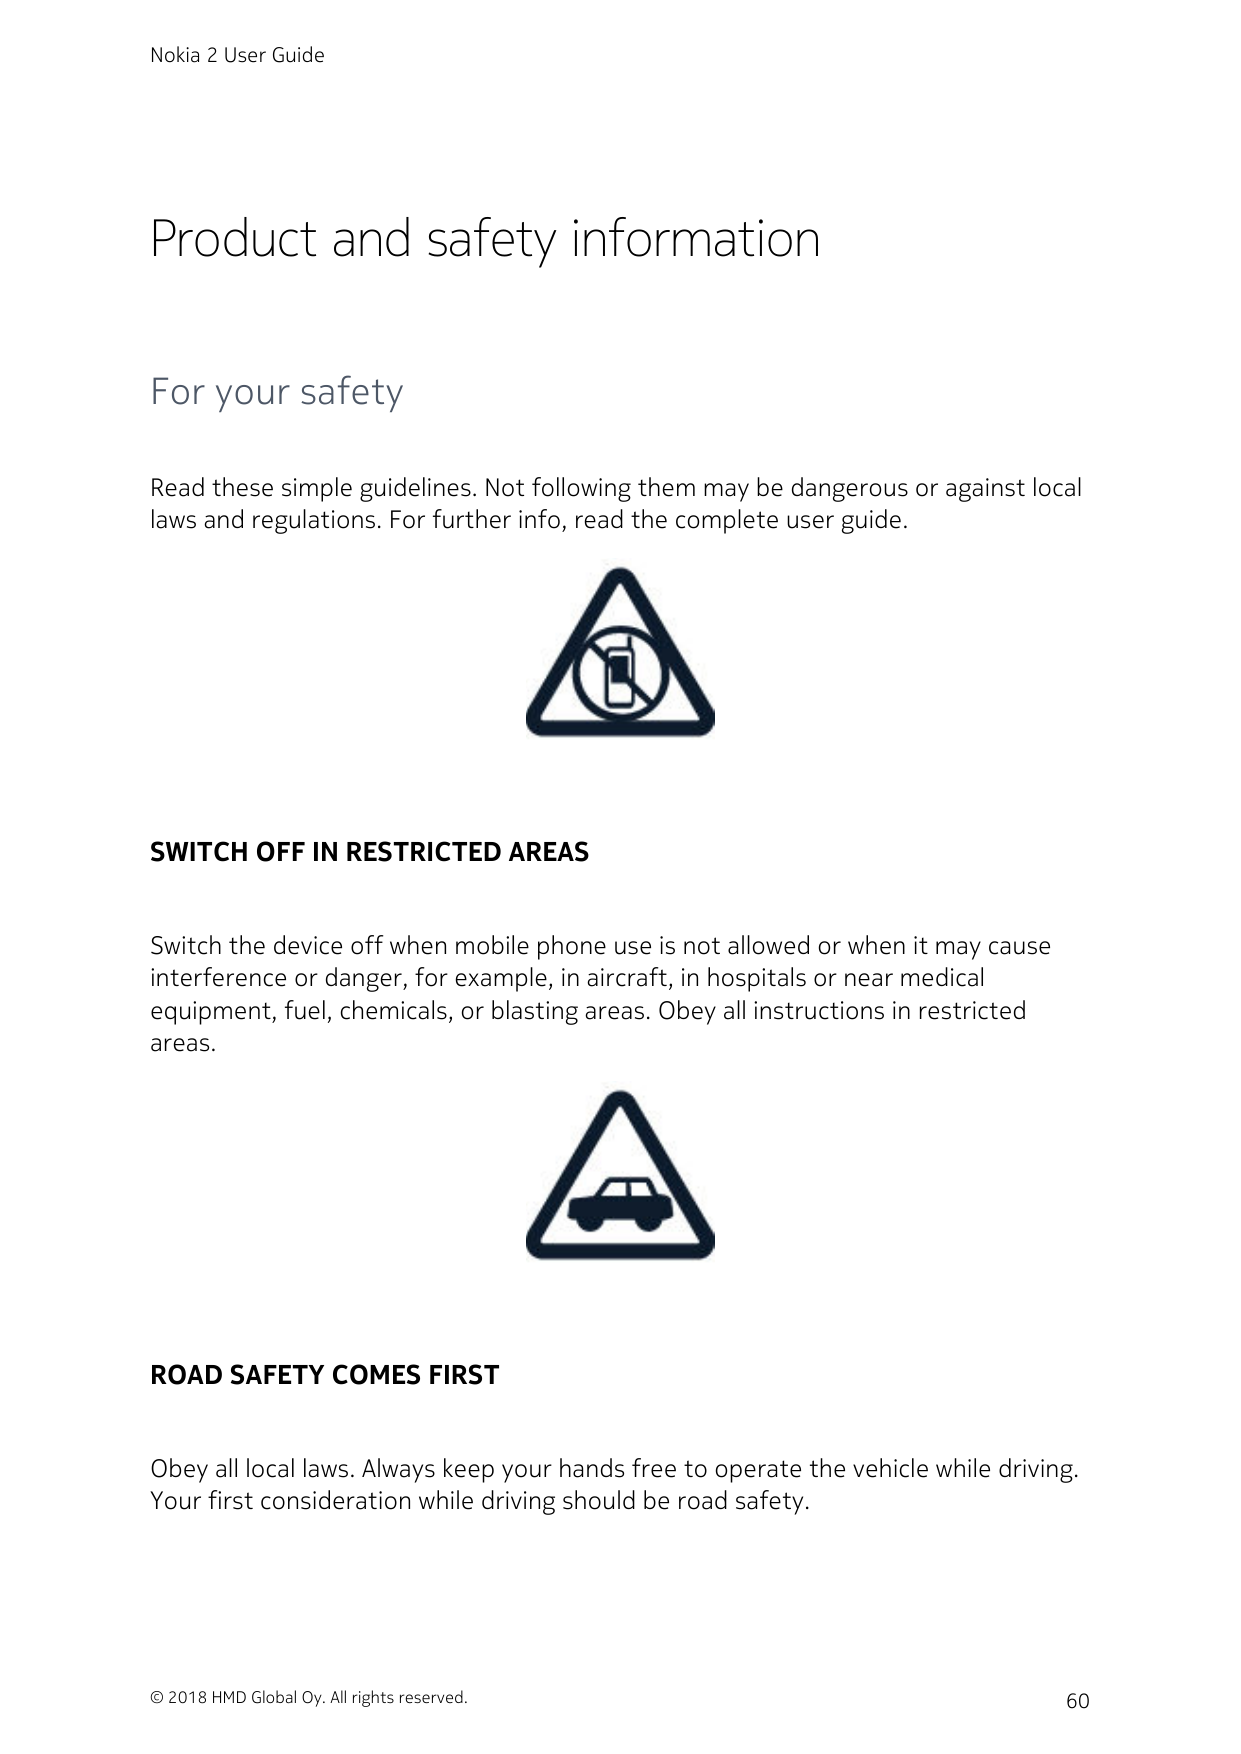 Nokia 2 User GuideProduct and safety informationFor your safetyRead these simple guidelines. Not following them may be dangerous